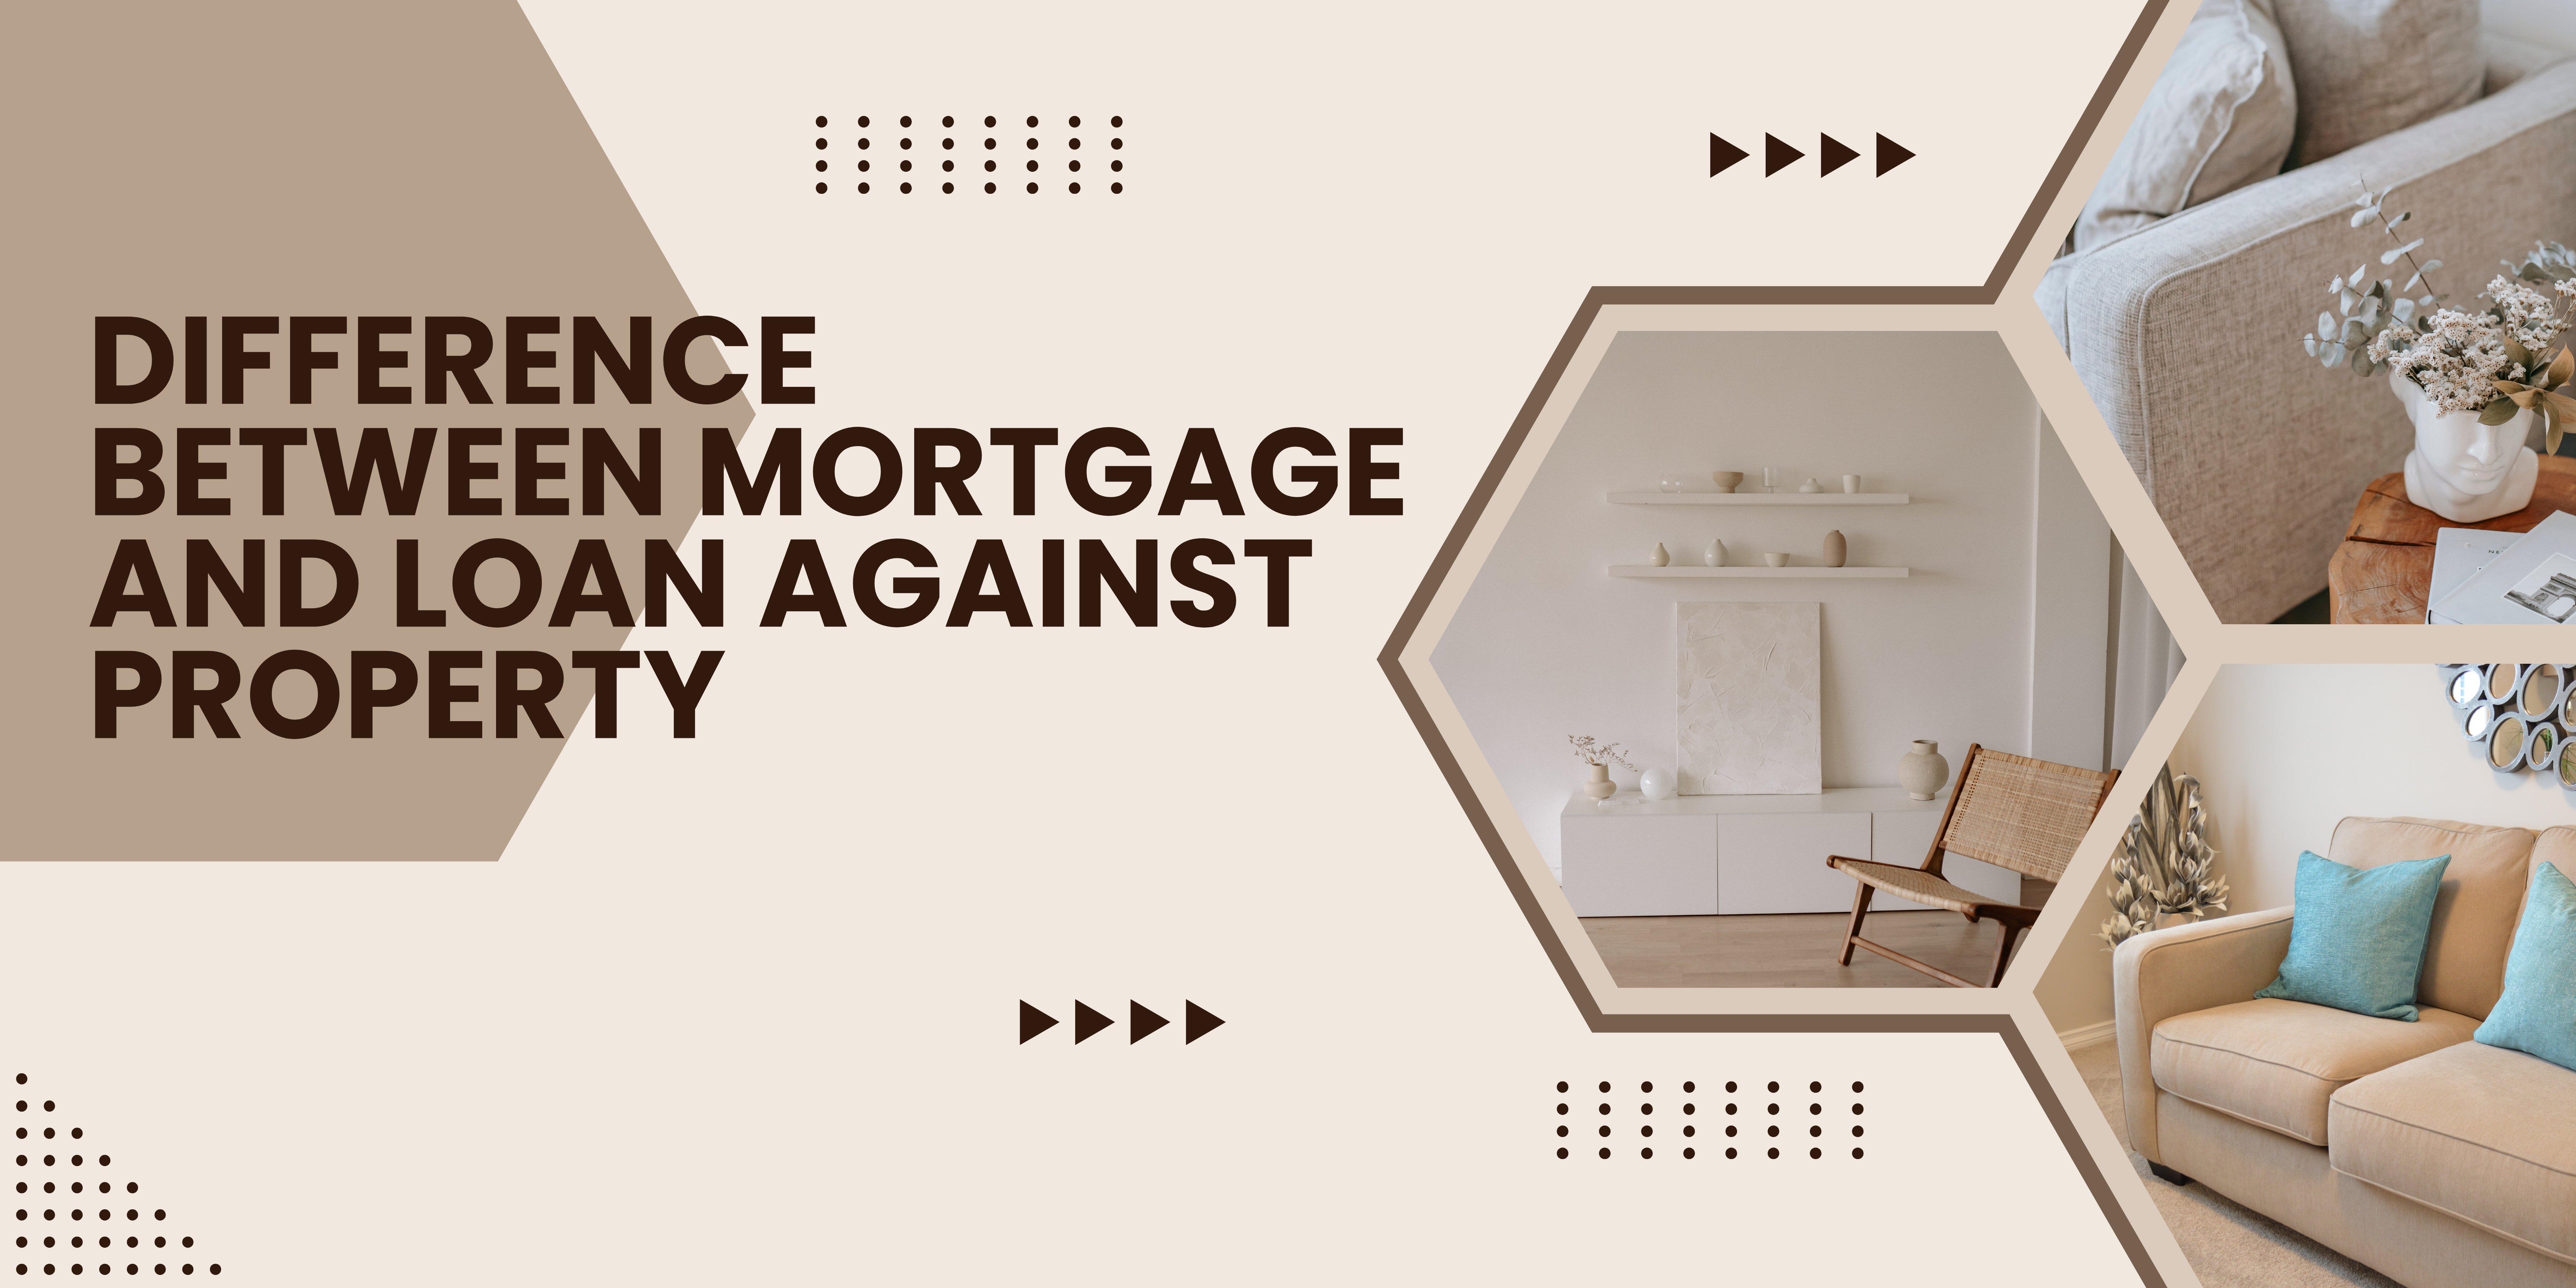 Difference Between Mortgage and Loan Against Property